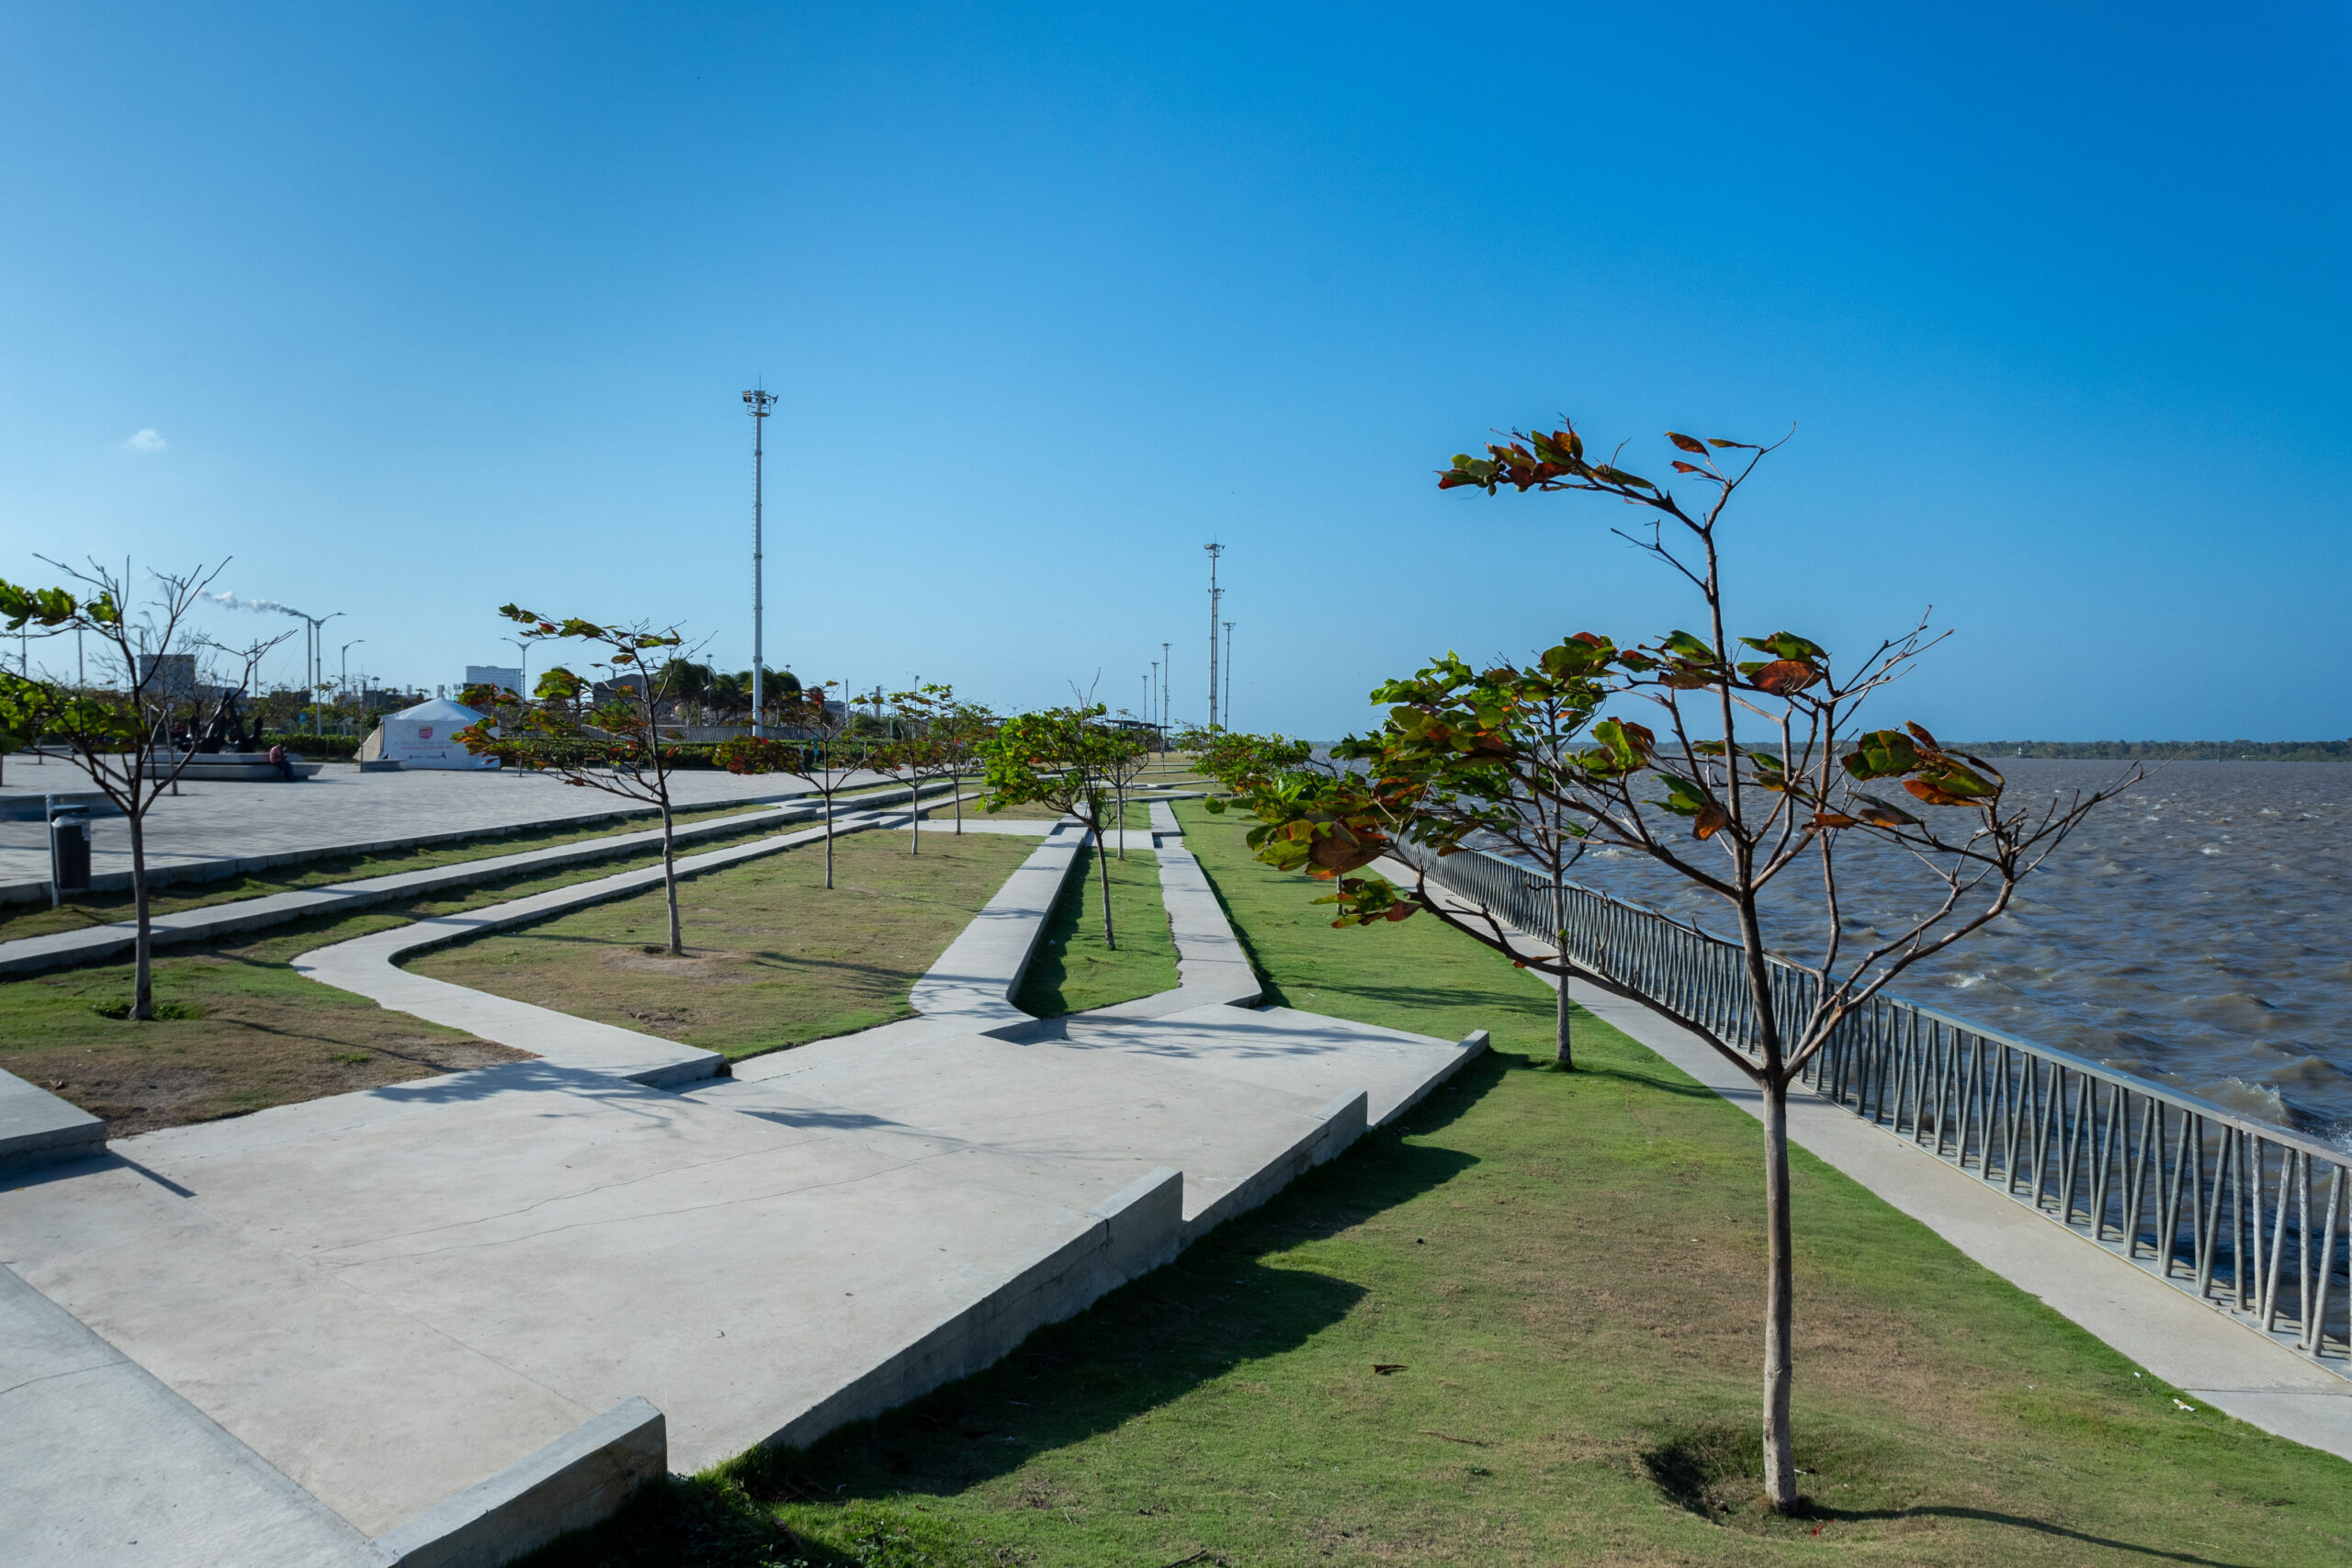 Landscape in Barranquilla, street the strolls one of the best things to do in Barranquilla